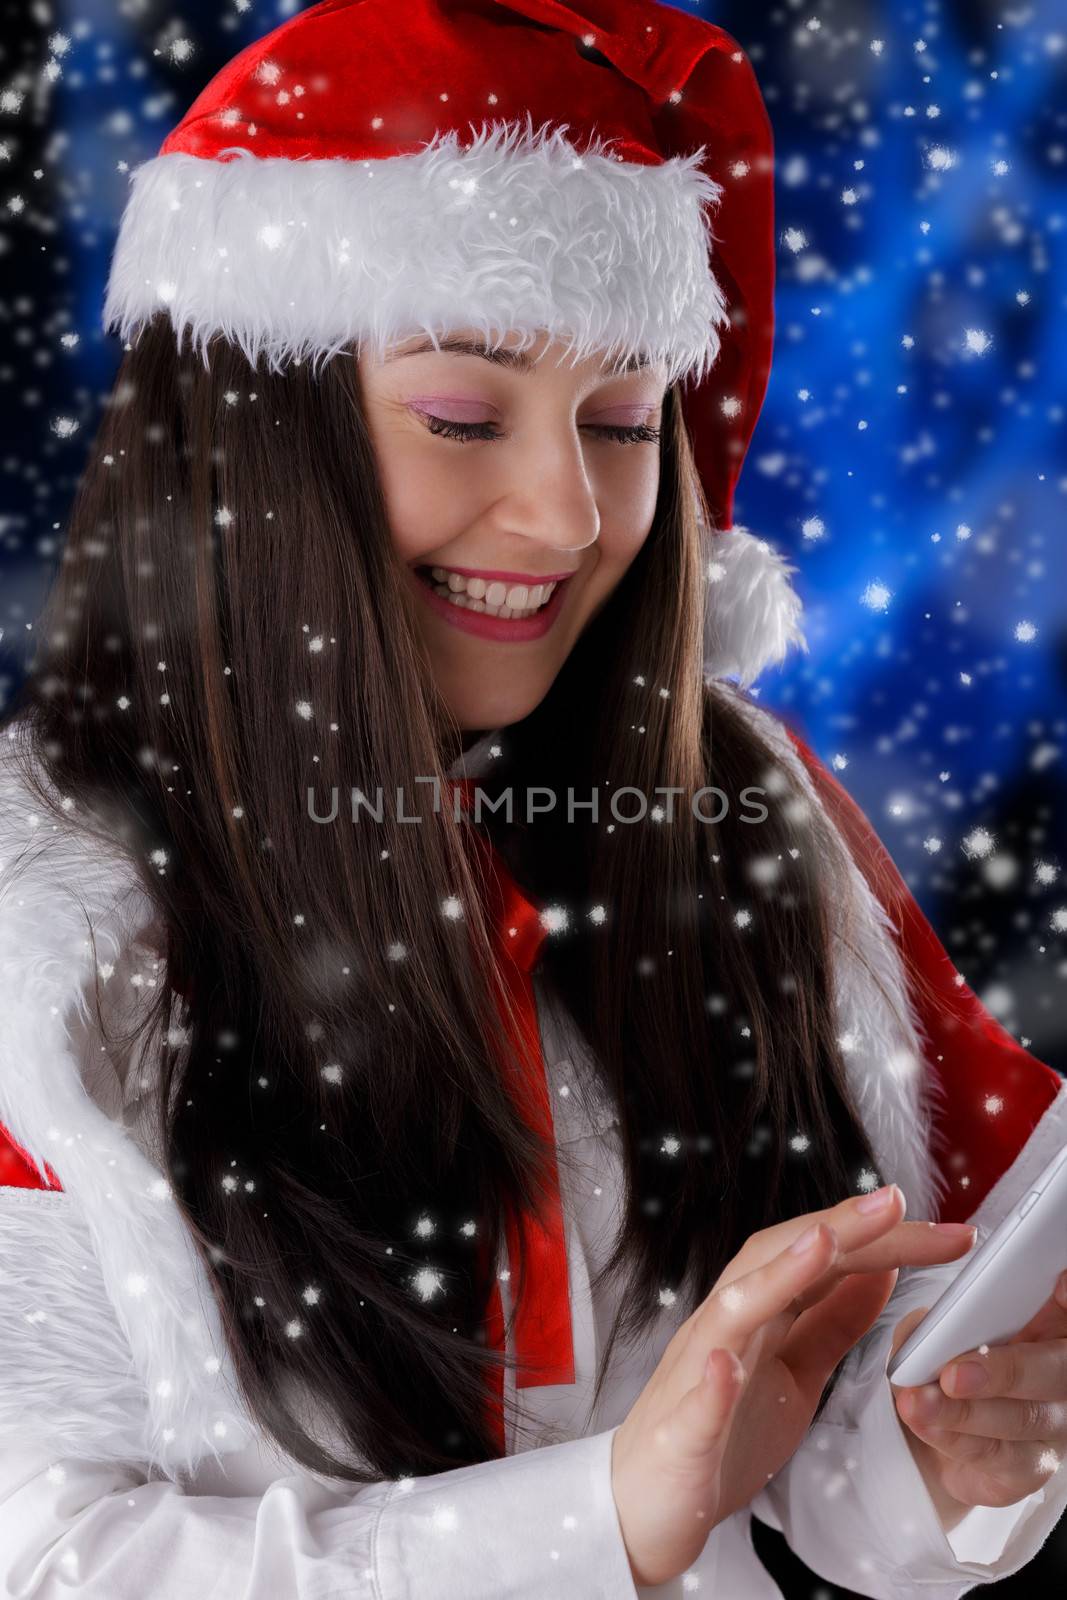 Beautiful girl interacting with a smart phone with snow falling around her.